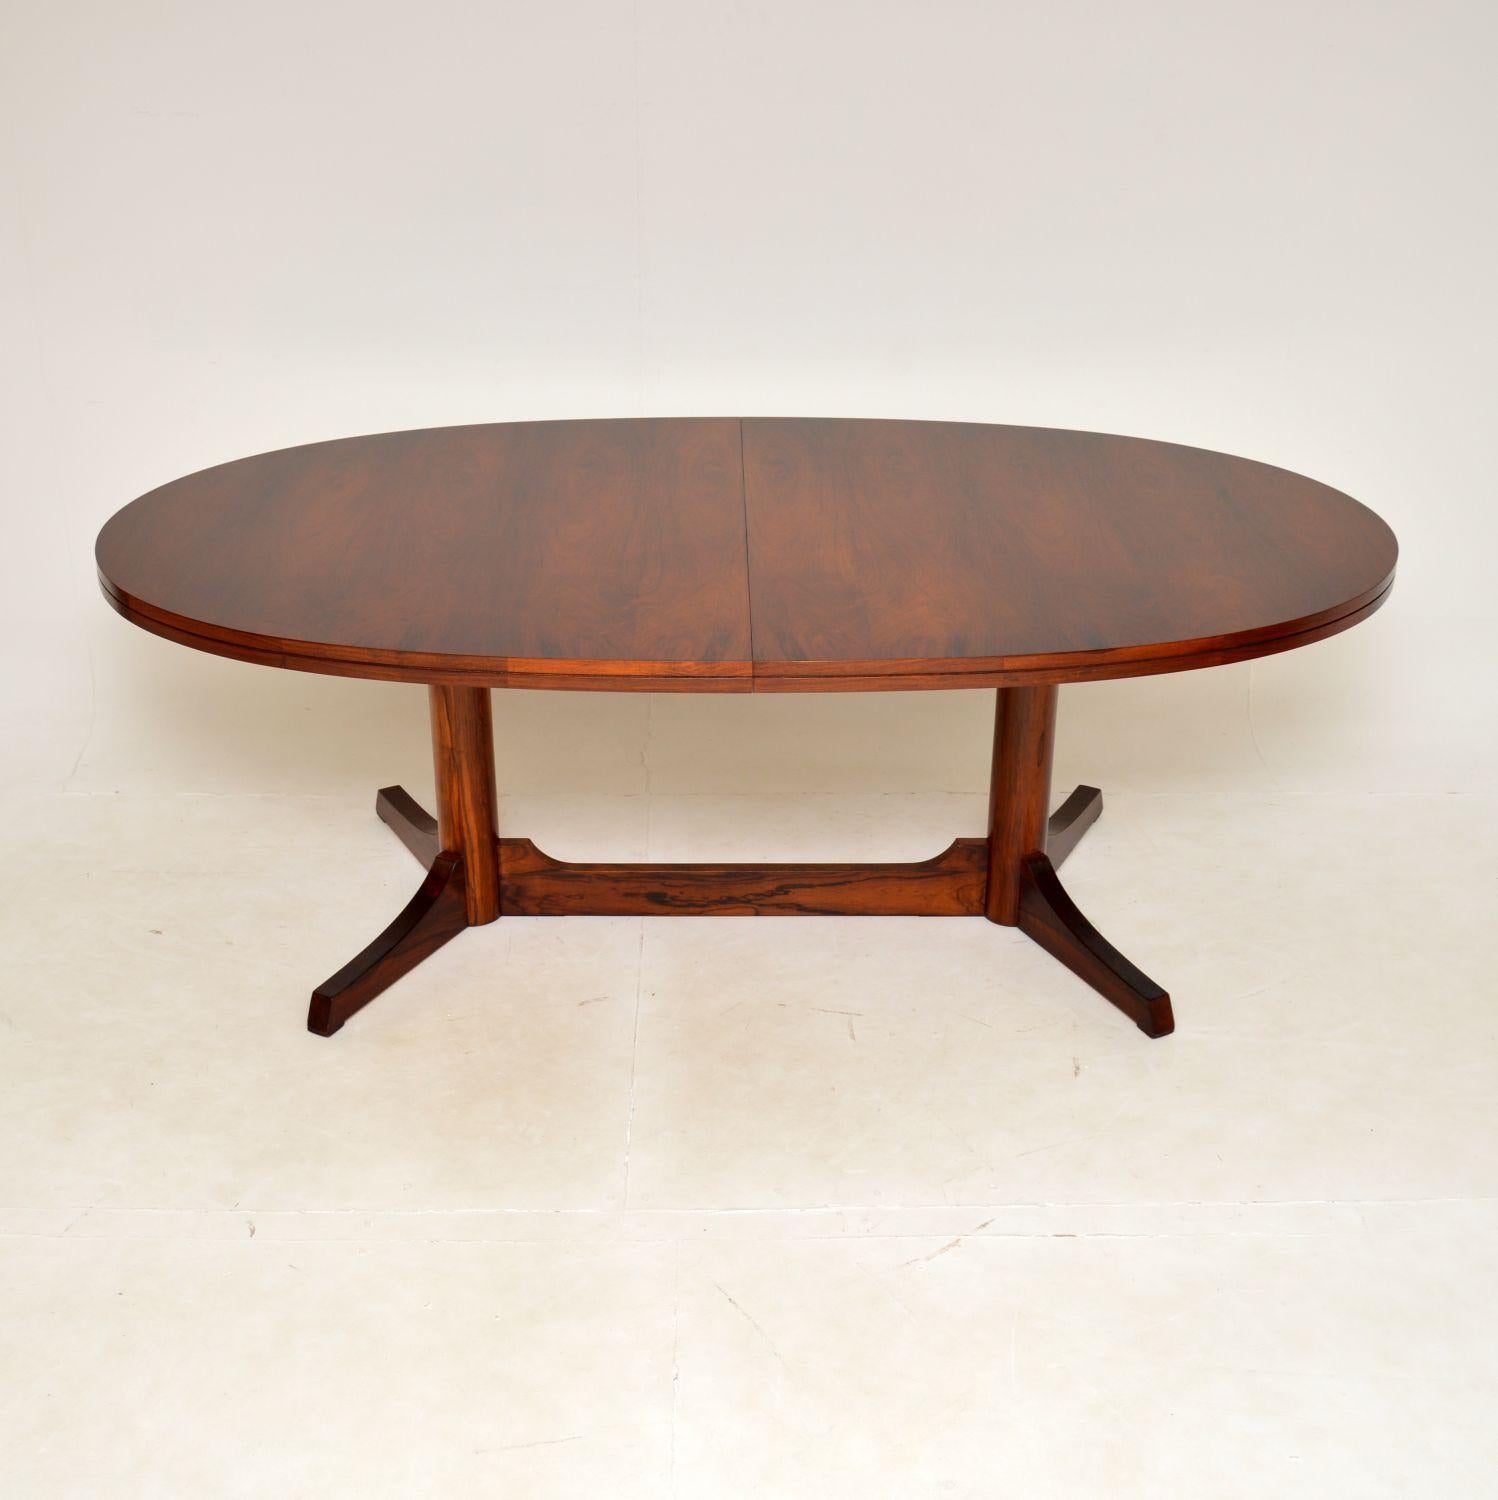 A large and impressive vintage dining table, designed by Robert Heritage for Archie Shine. This was made in England, it dates from the 1960s.

It is of superb quality, the large oval top can easily seat eight when closed. There is an extra leaf